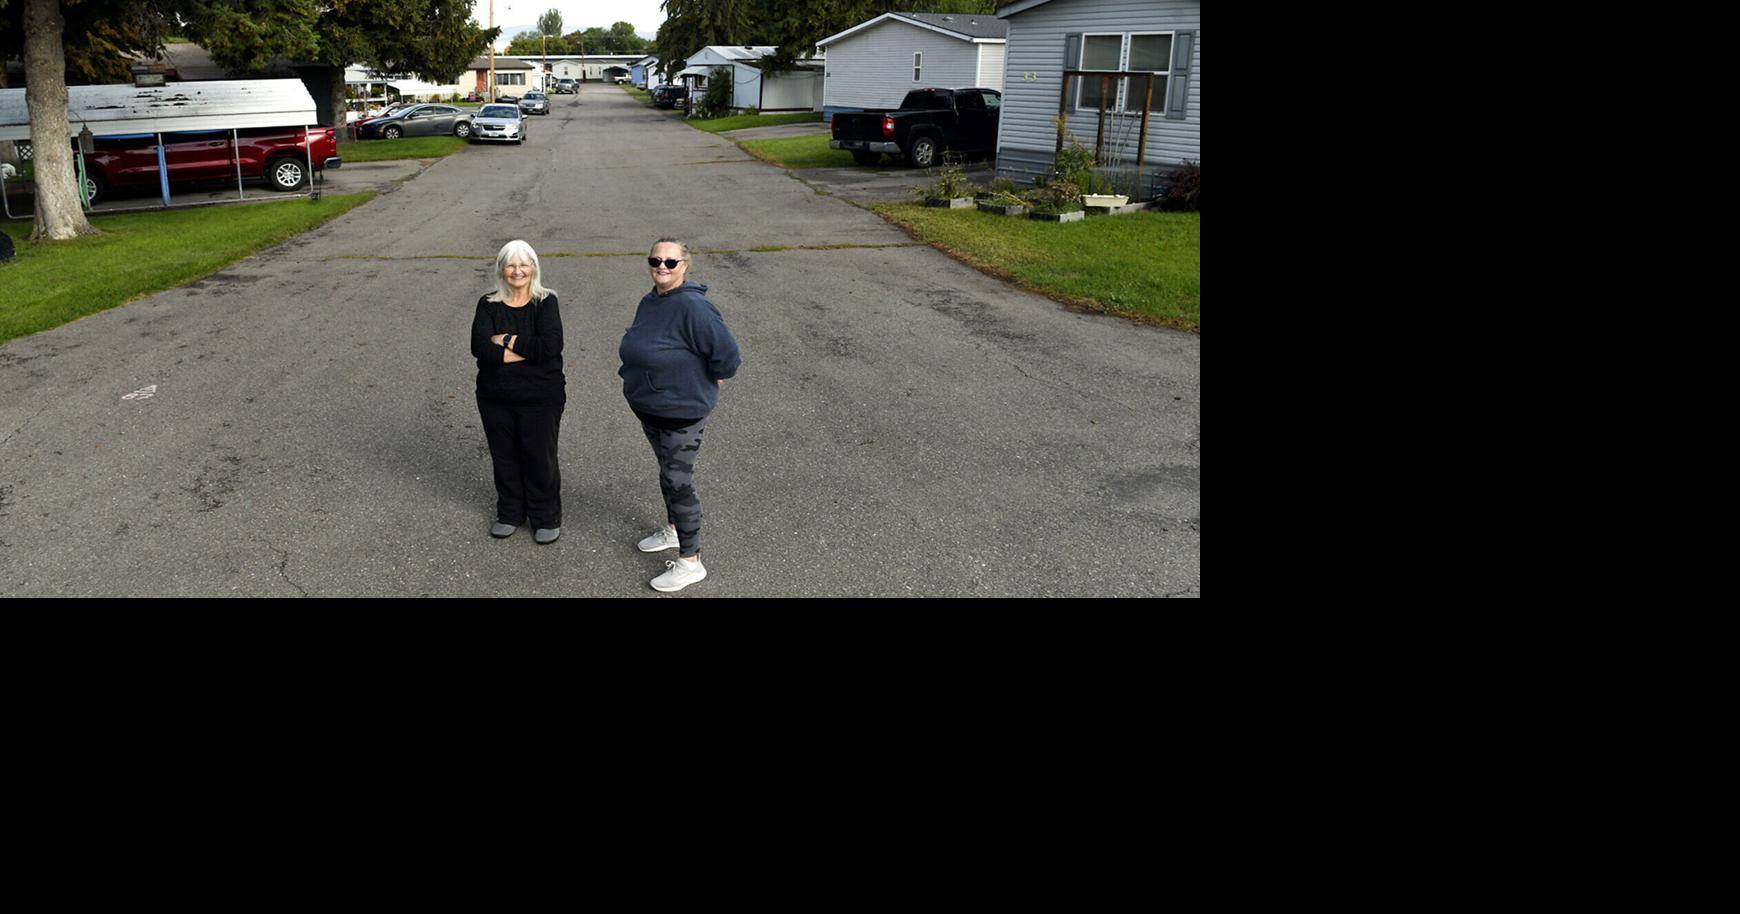 Low-income tenants lack options as old mobile home parks are razed –